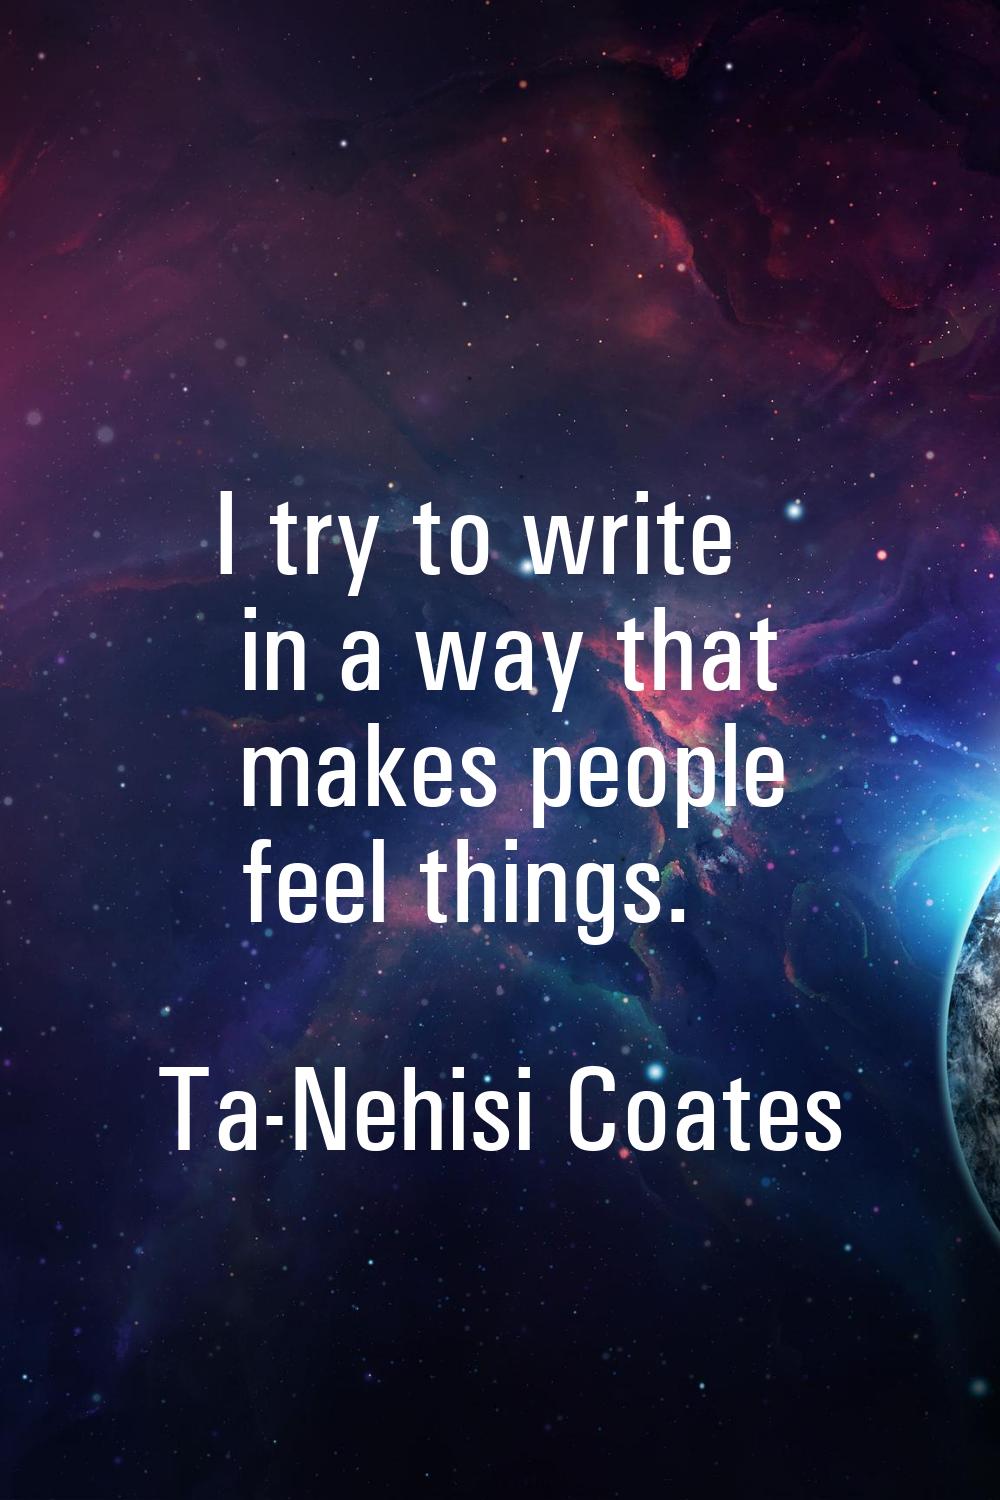 I try to write in a way that makes people feel things.